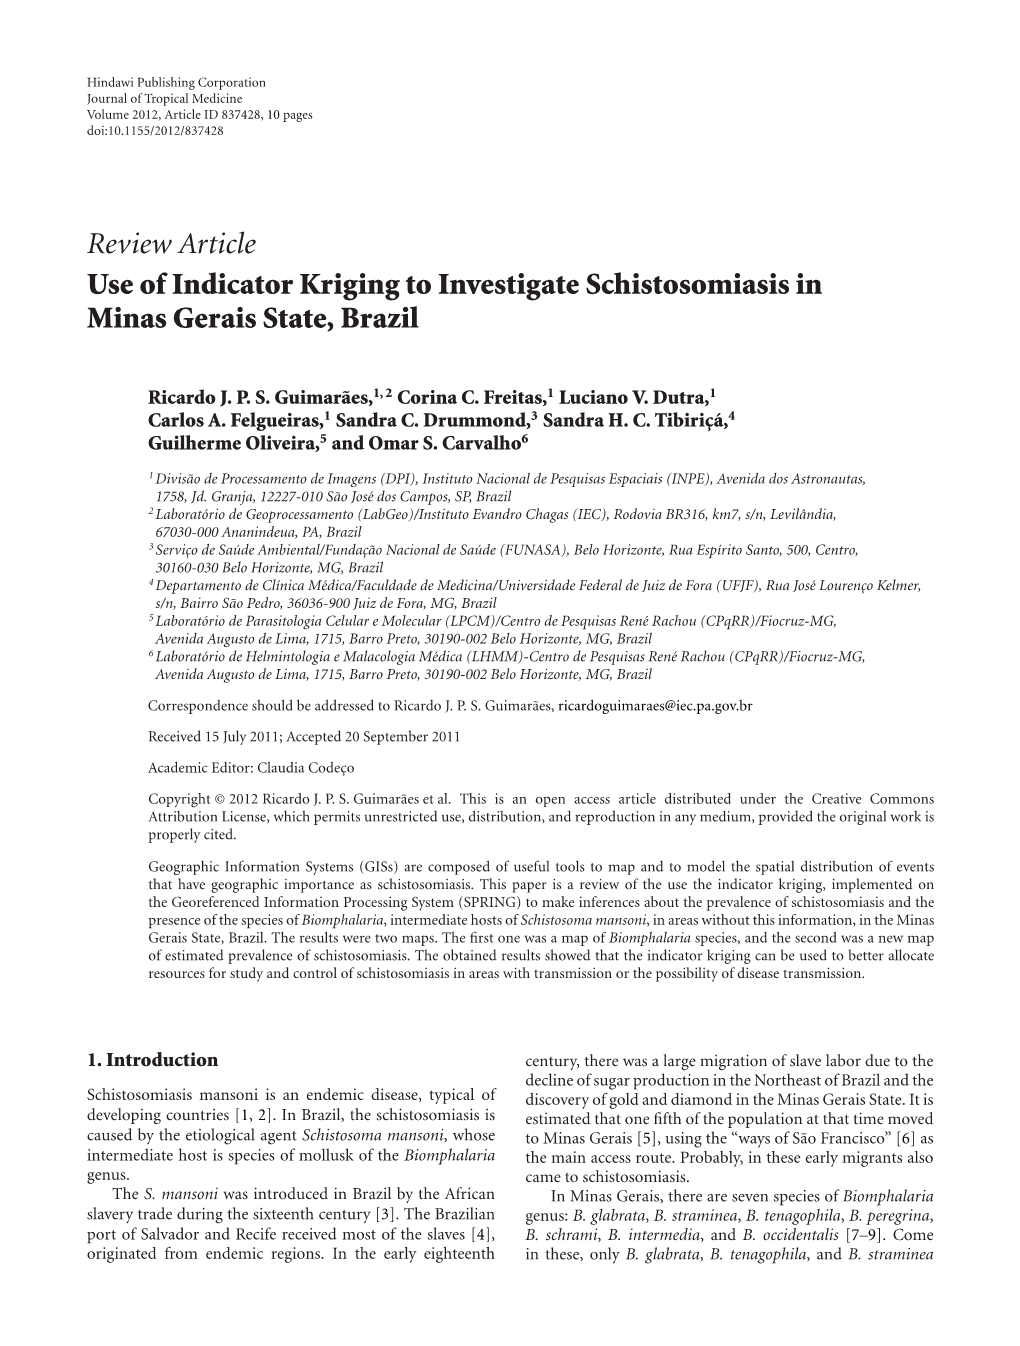 Use of Indicator Kriging to Investigate Schistosomiasis in Minas Gerais State, Brazil